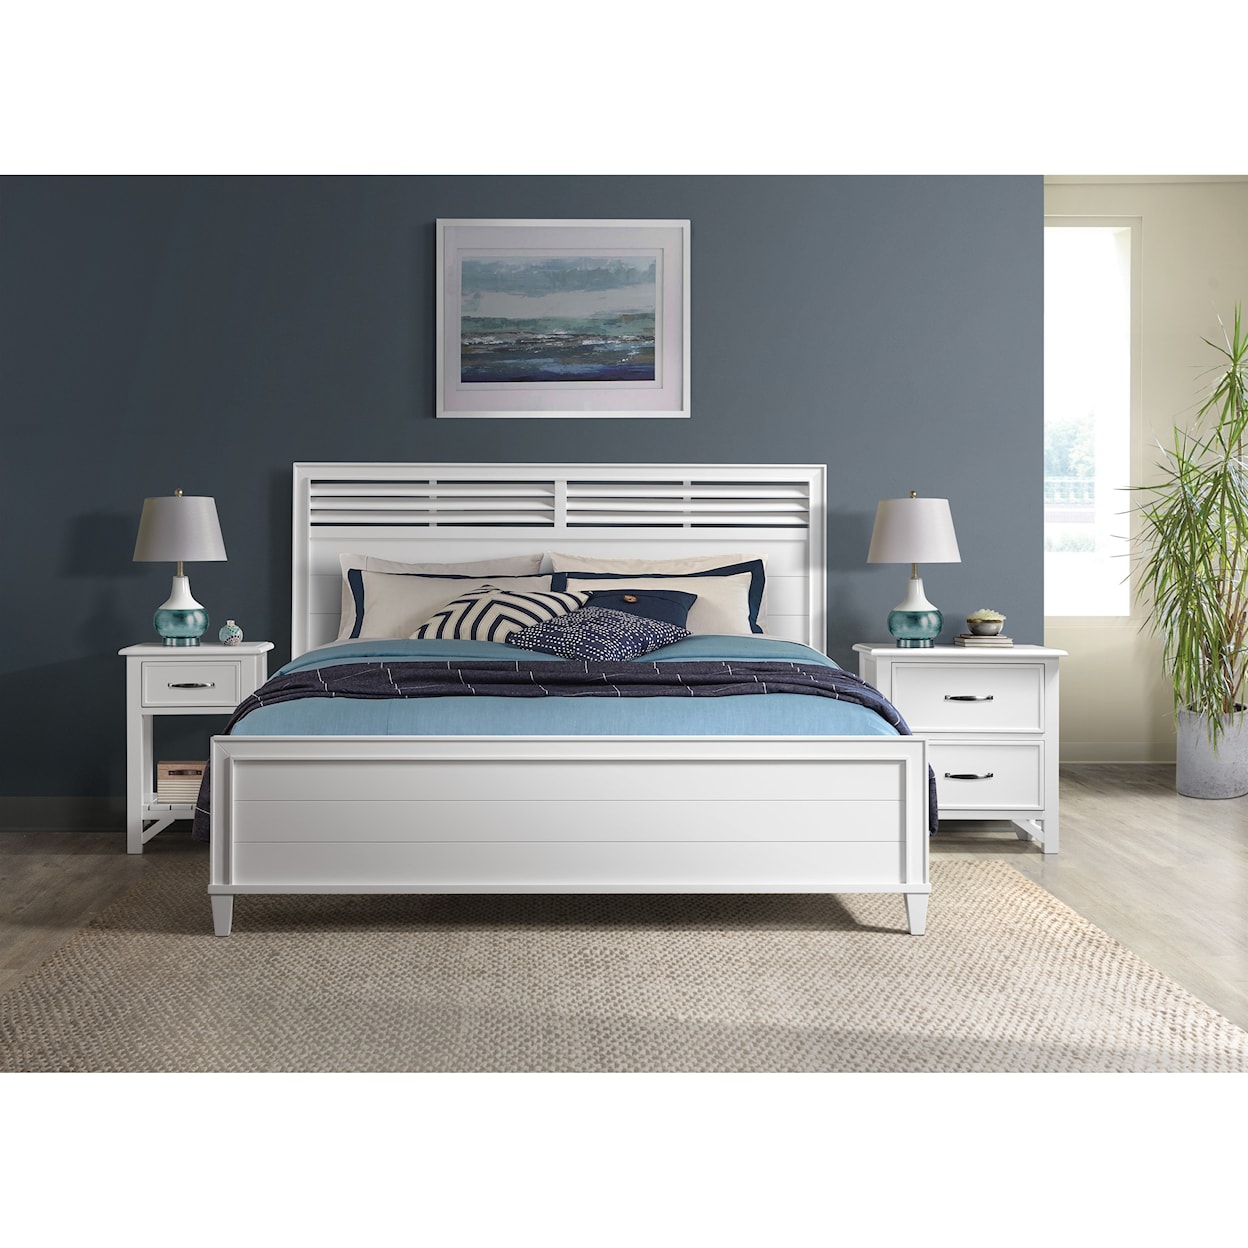 Riverside Furniture Talford Cotton Queen Bed